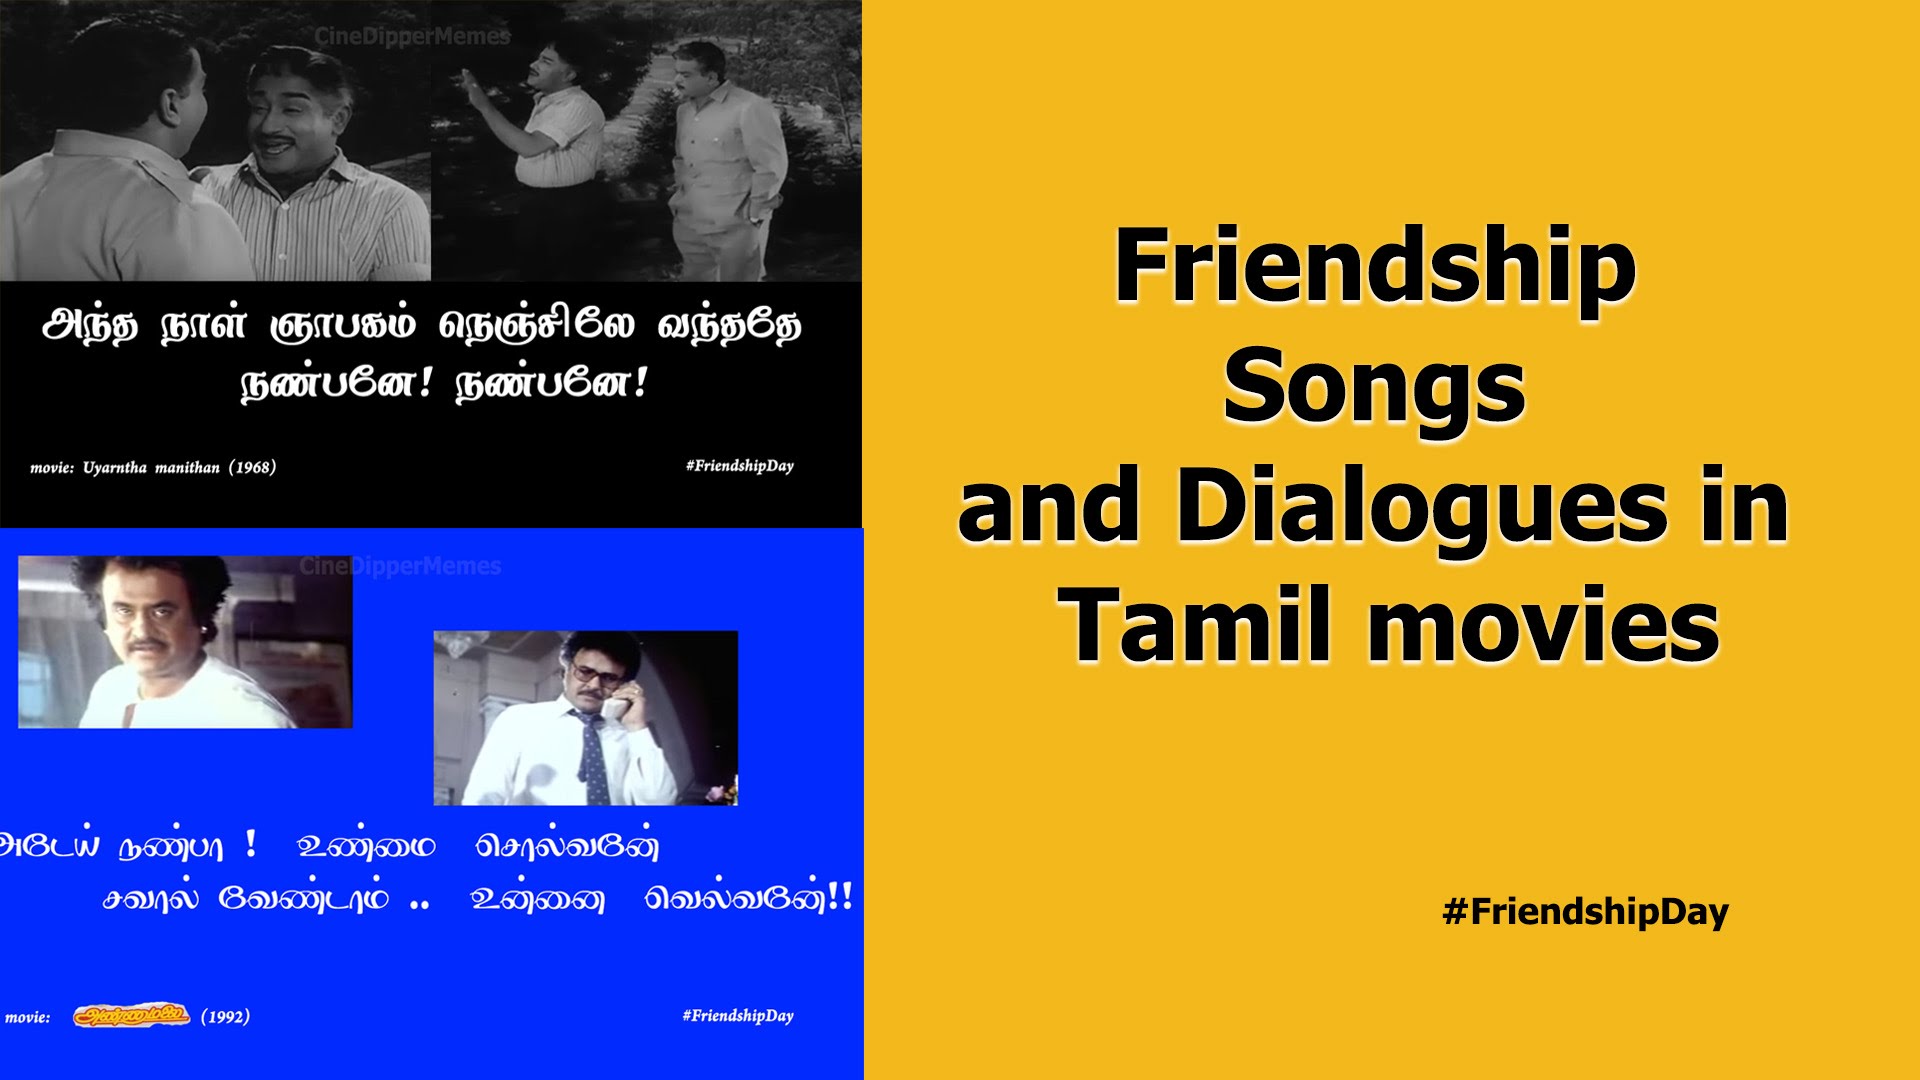 Friendship Songs and Dialogues in Tamil movies #FriendshipDay - YouTube